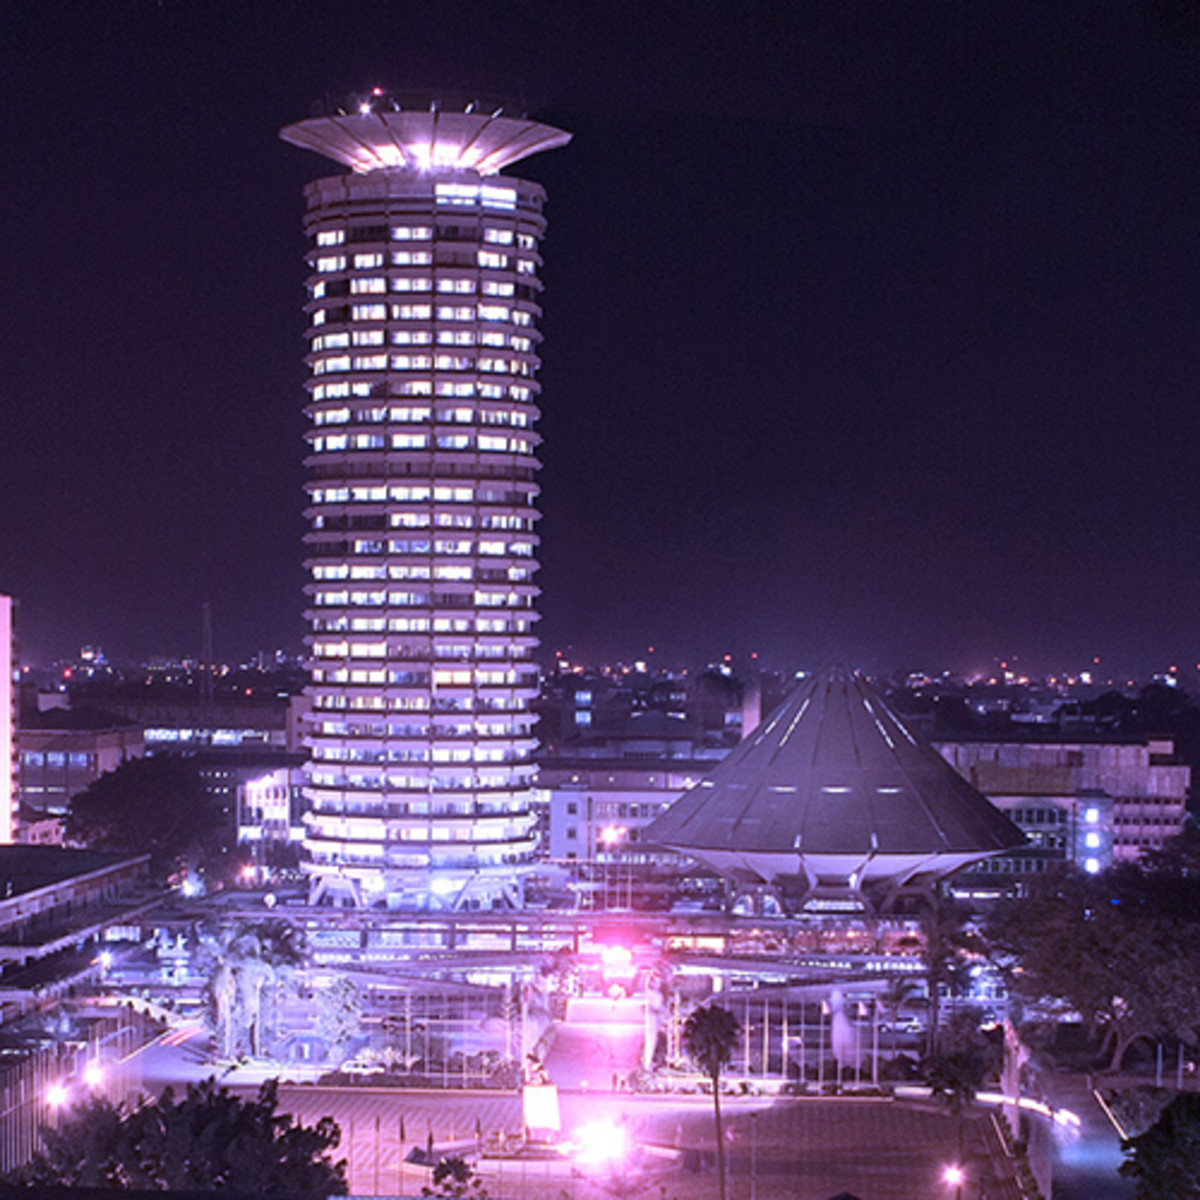 Photo showing the KICC building at night